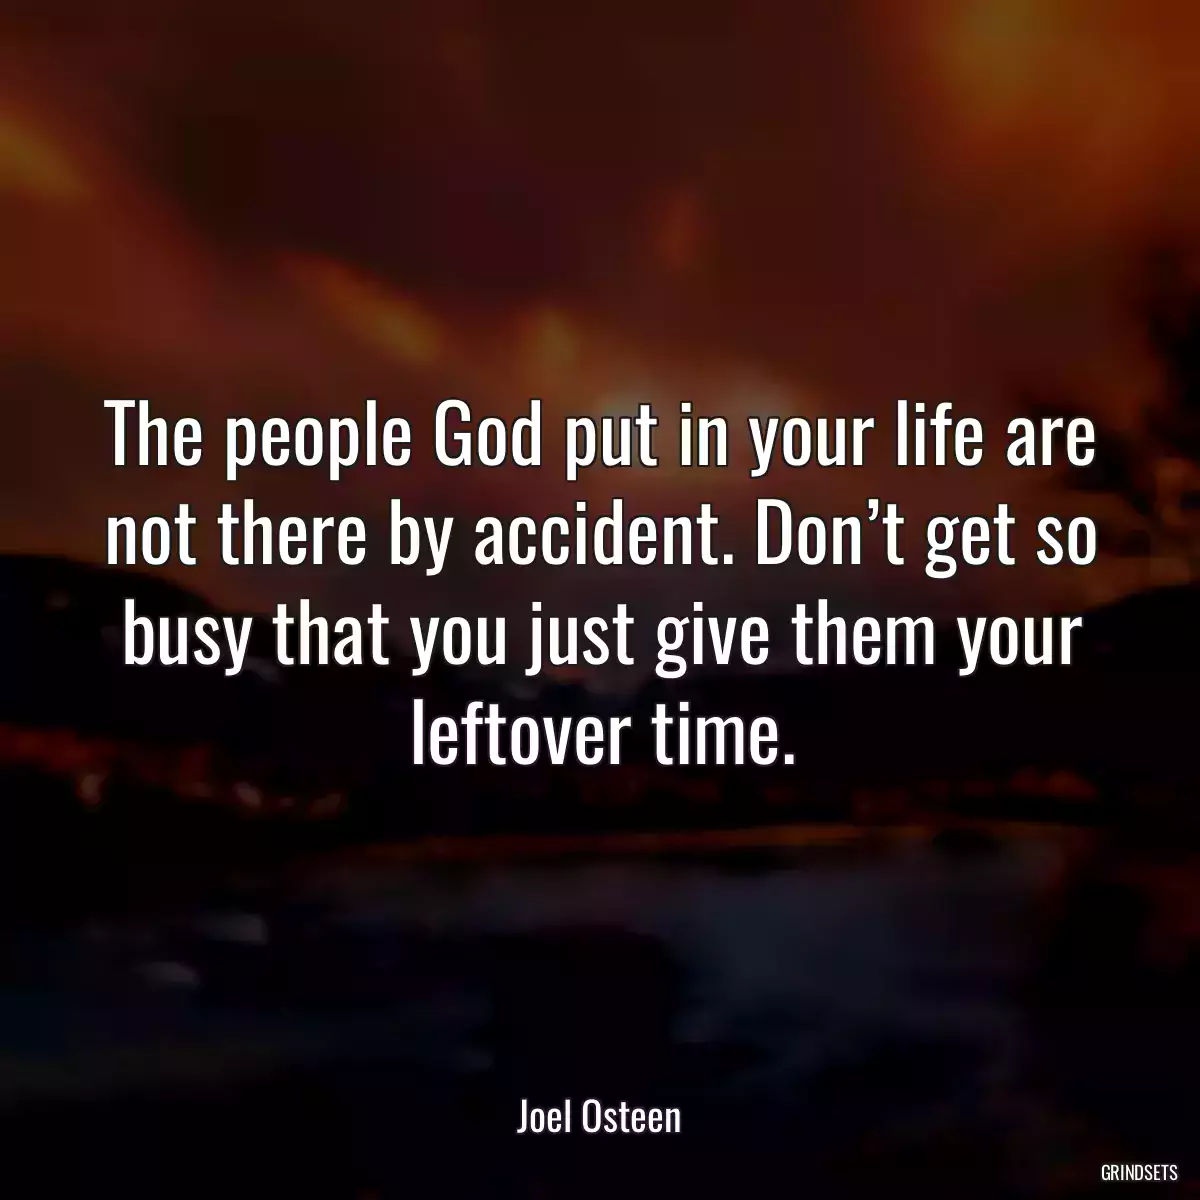 The people God put in your life are not there by accident. Don’t get so busy that you just give them your leftover time.